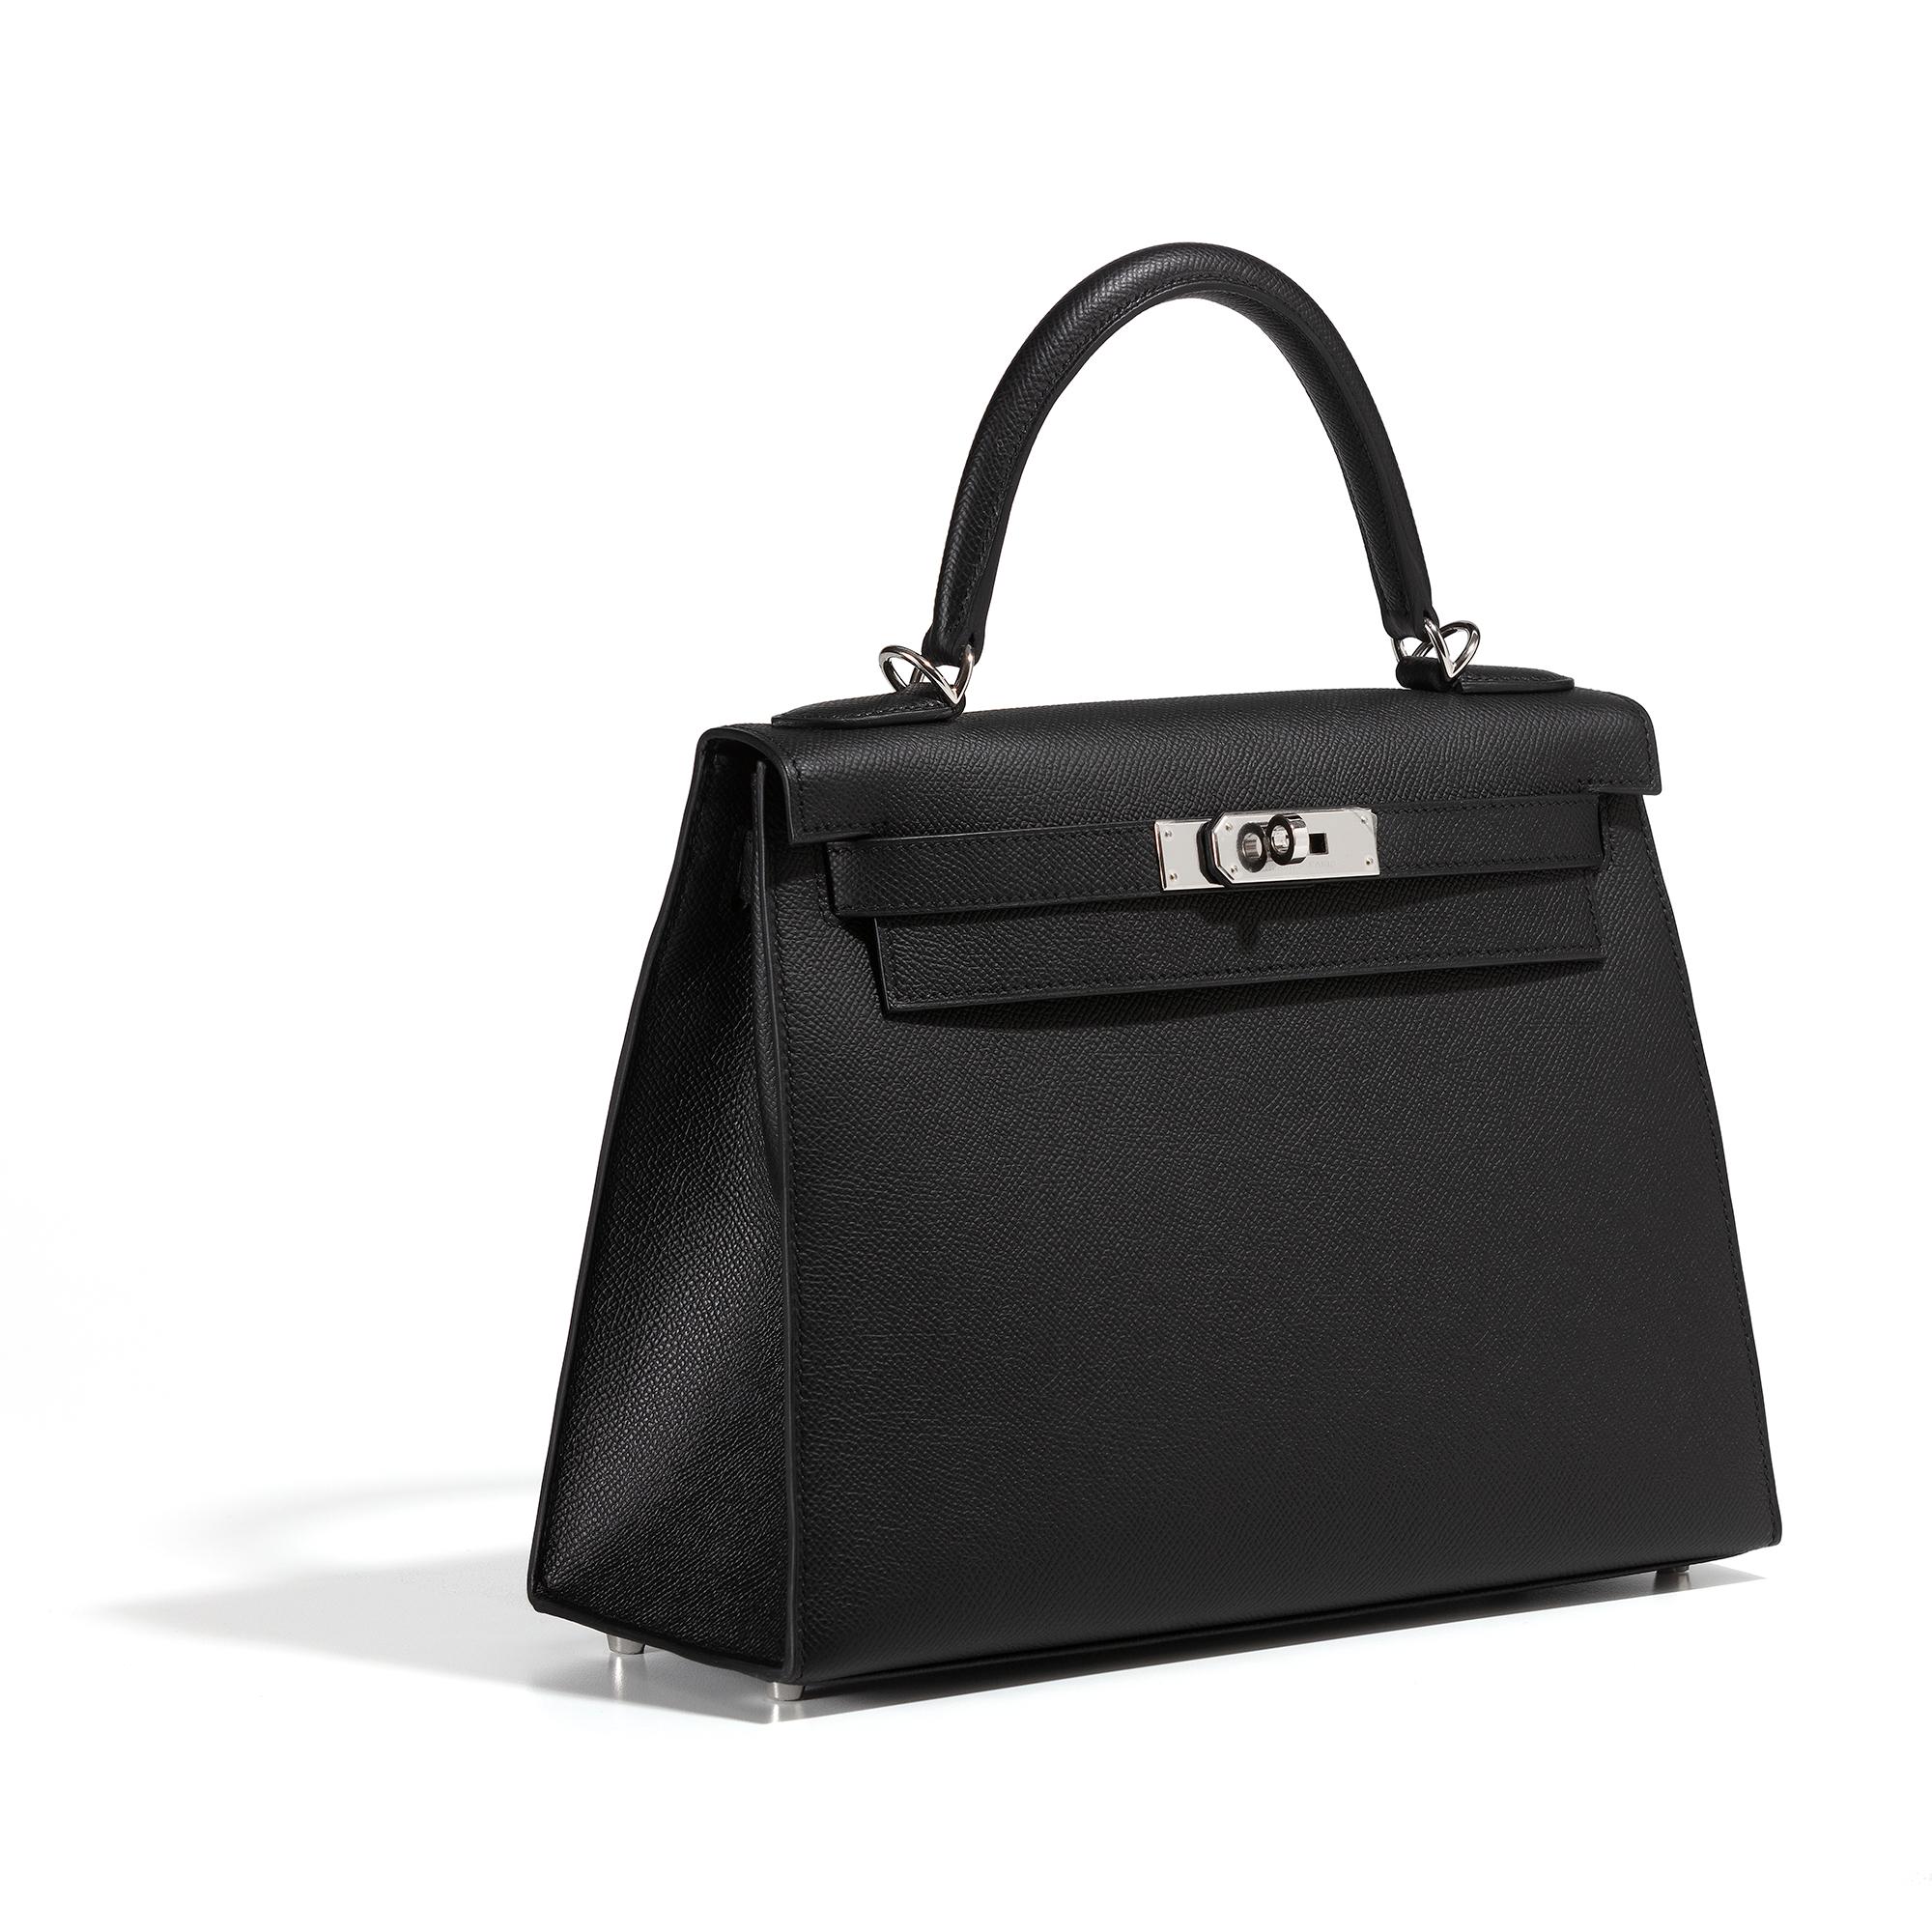 Experience timeless luxury with this exquisite Kelly 28 bag made from Epsom leather and finished with shimmering palladium hardware. This bag was crafted in France in 2022 (Stamp 